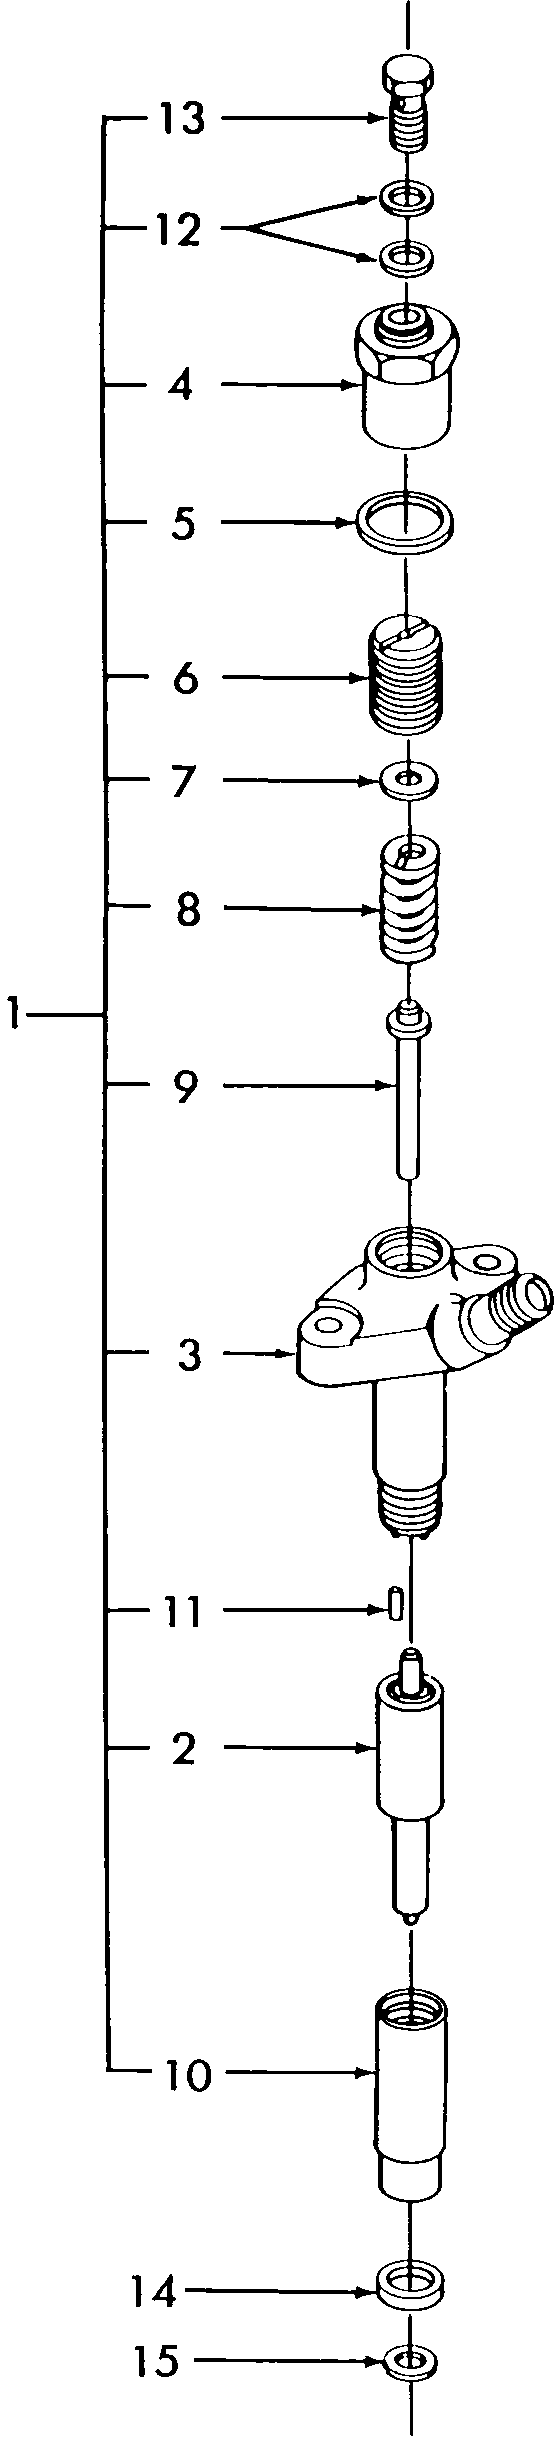 09C01 FUEL INJECTOR ASSEMBLY (-/2-90)